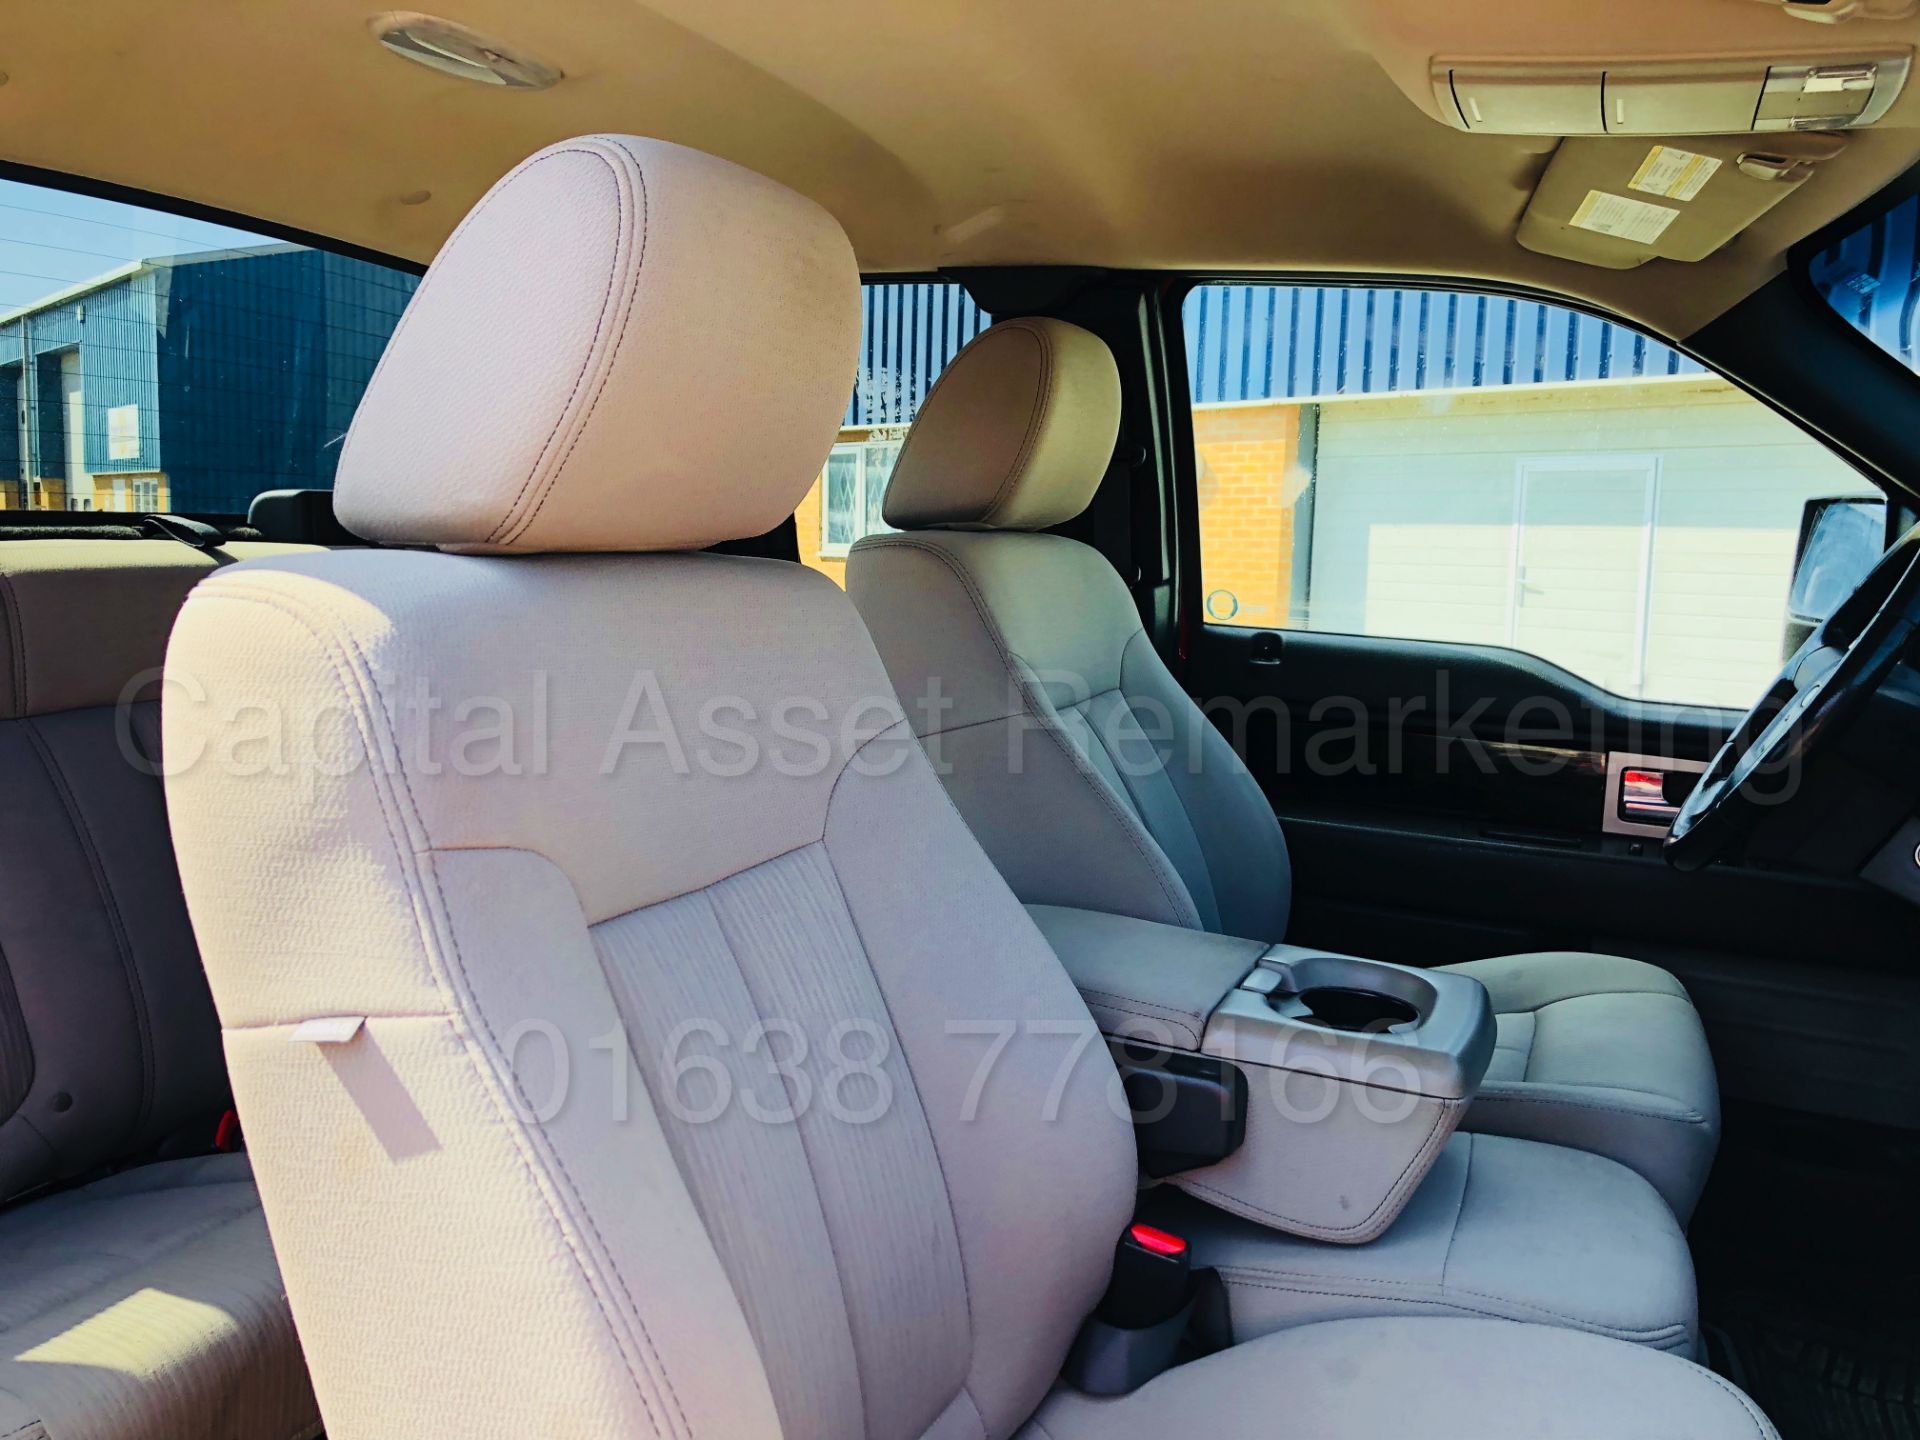 (On Sale) FORD F-150 **FX-4 EDITION** KING CAB '6 SEATER' (2010) '5.4L V8 - AUTO - 4X4' *HUGE SPEC* - Image 39 of 47